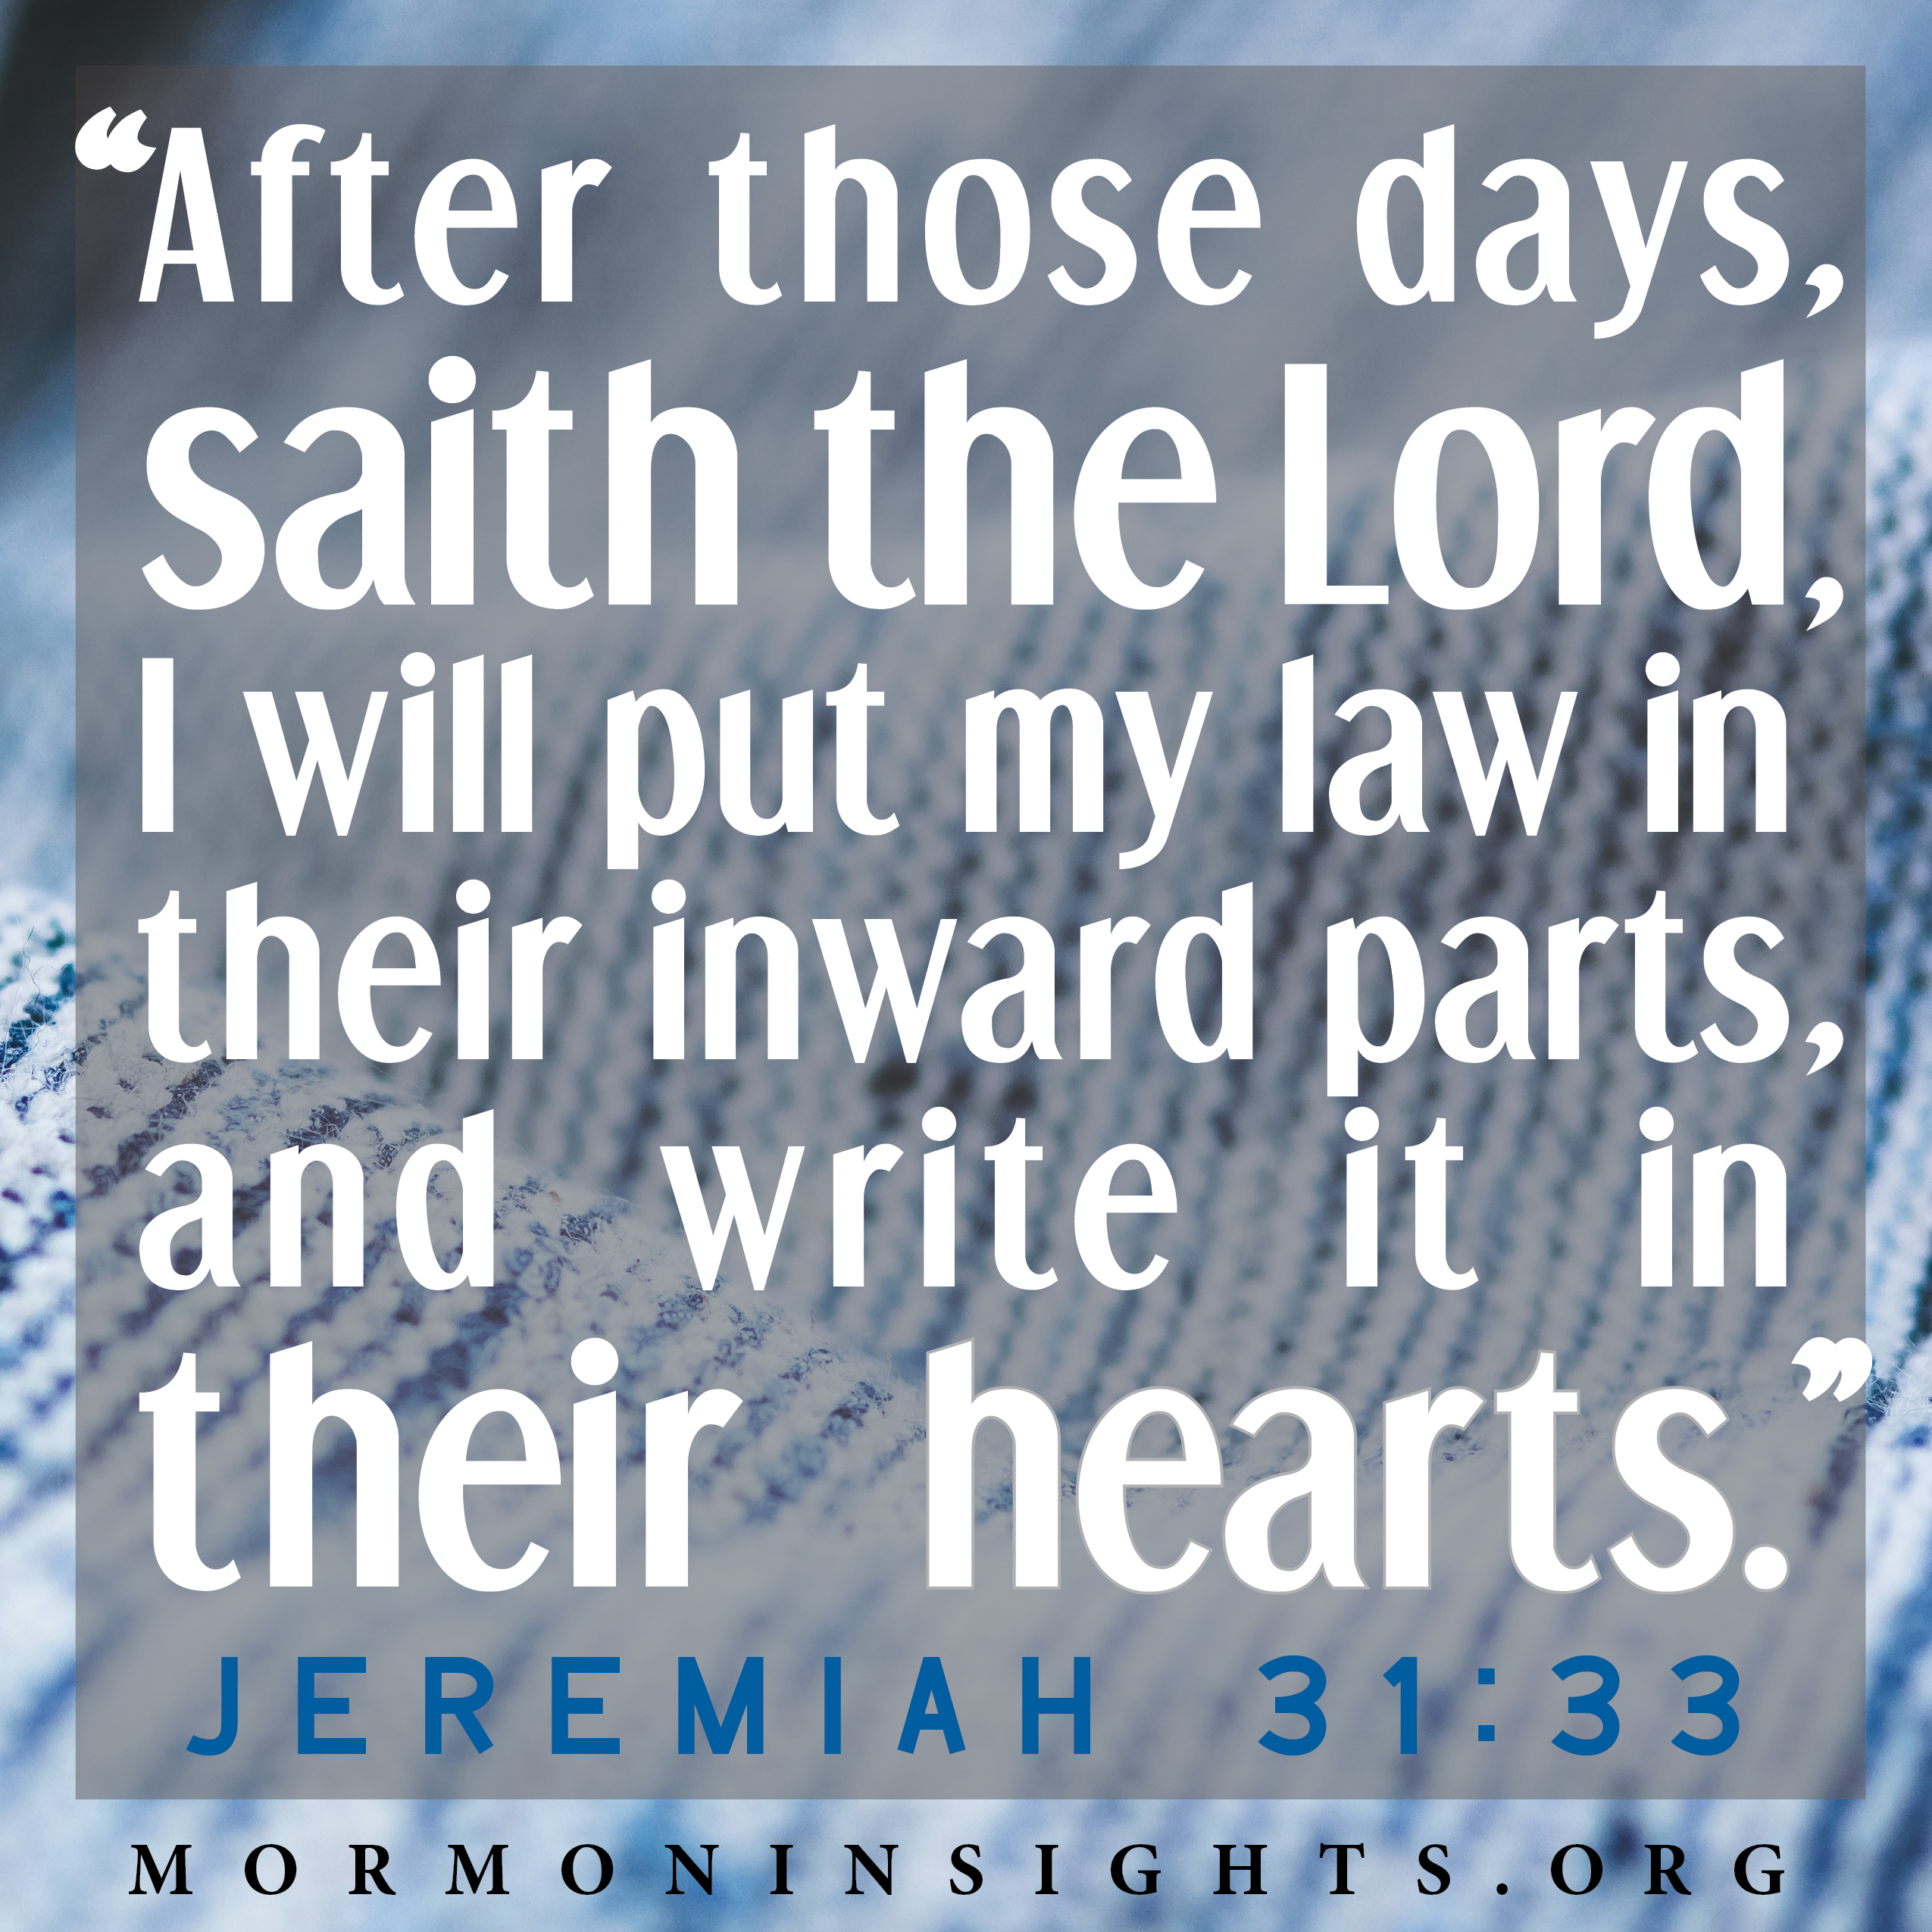 I will put my law in their inward parts and write it in their hearts.